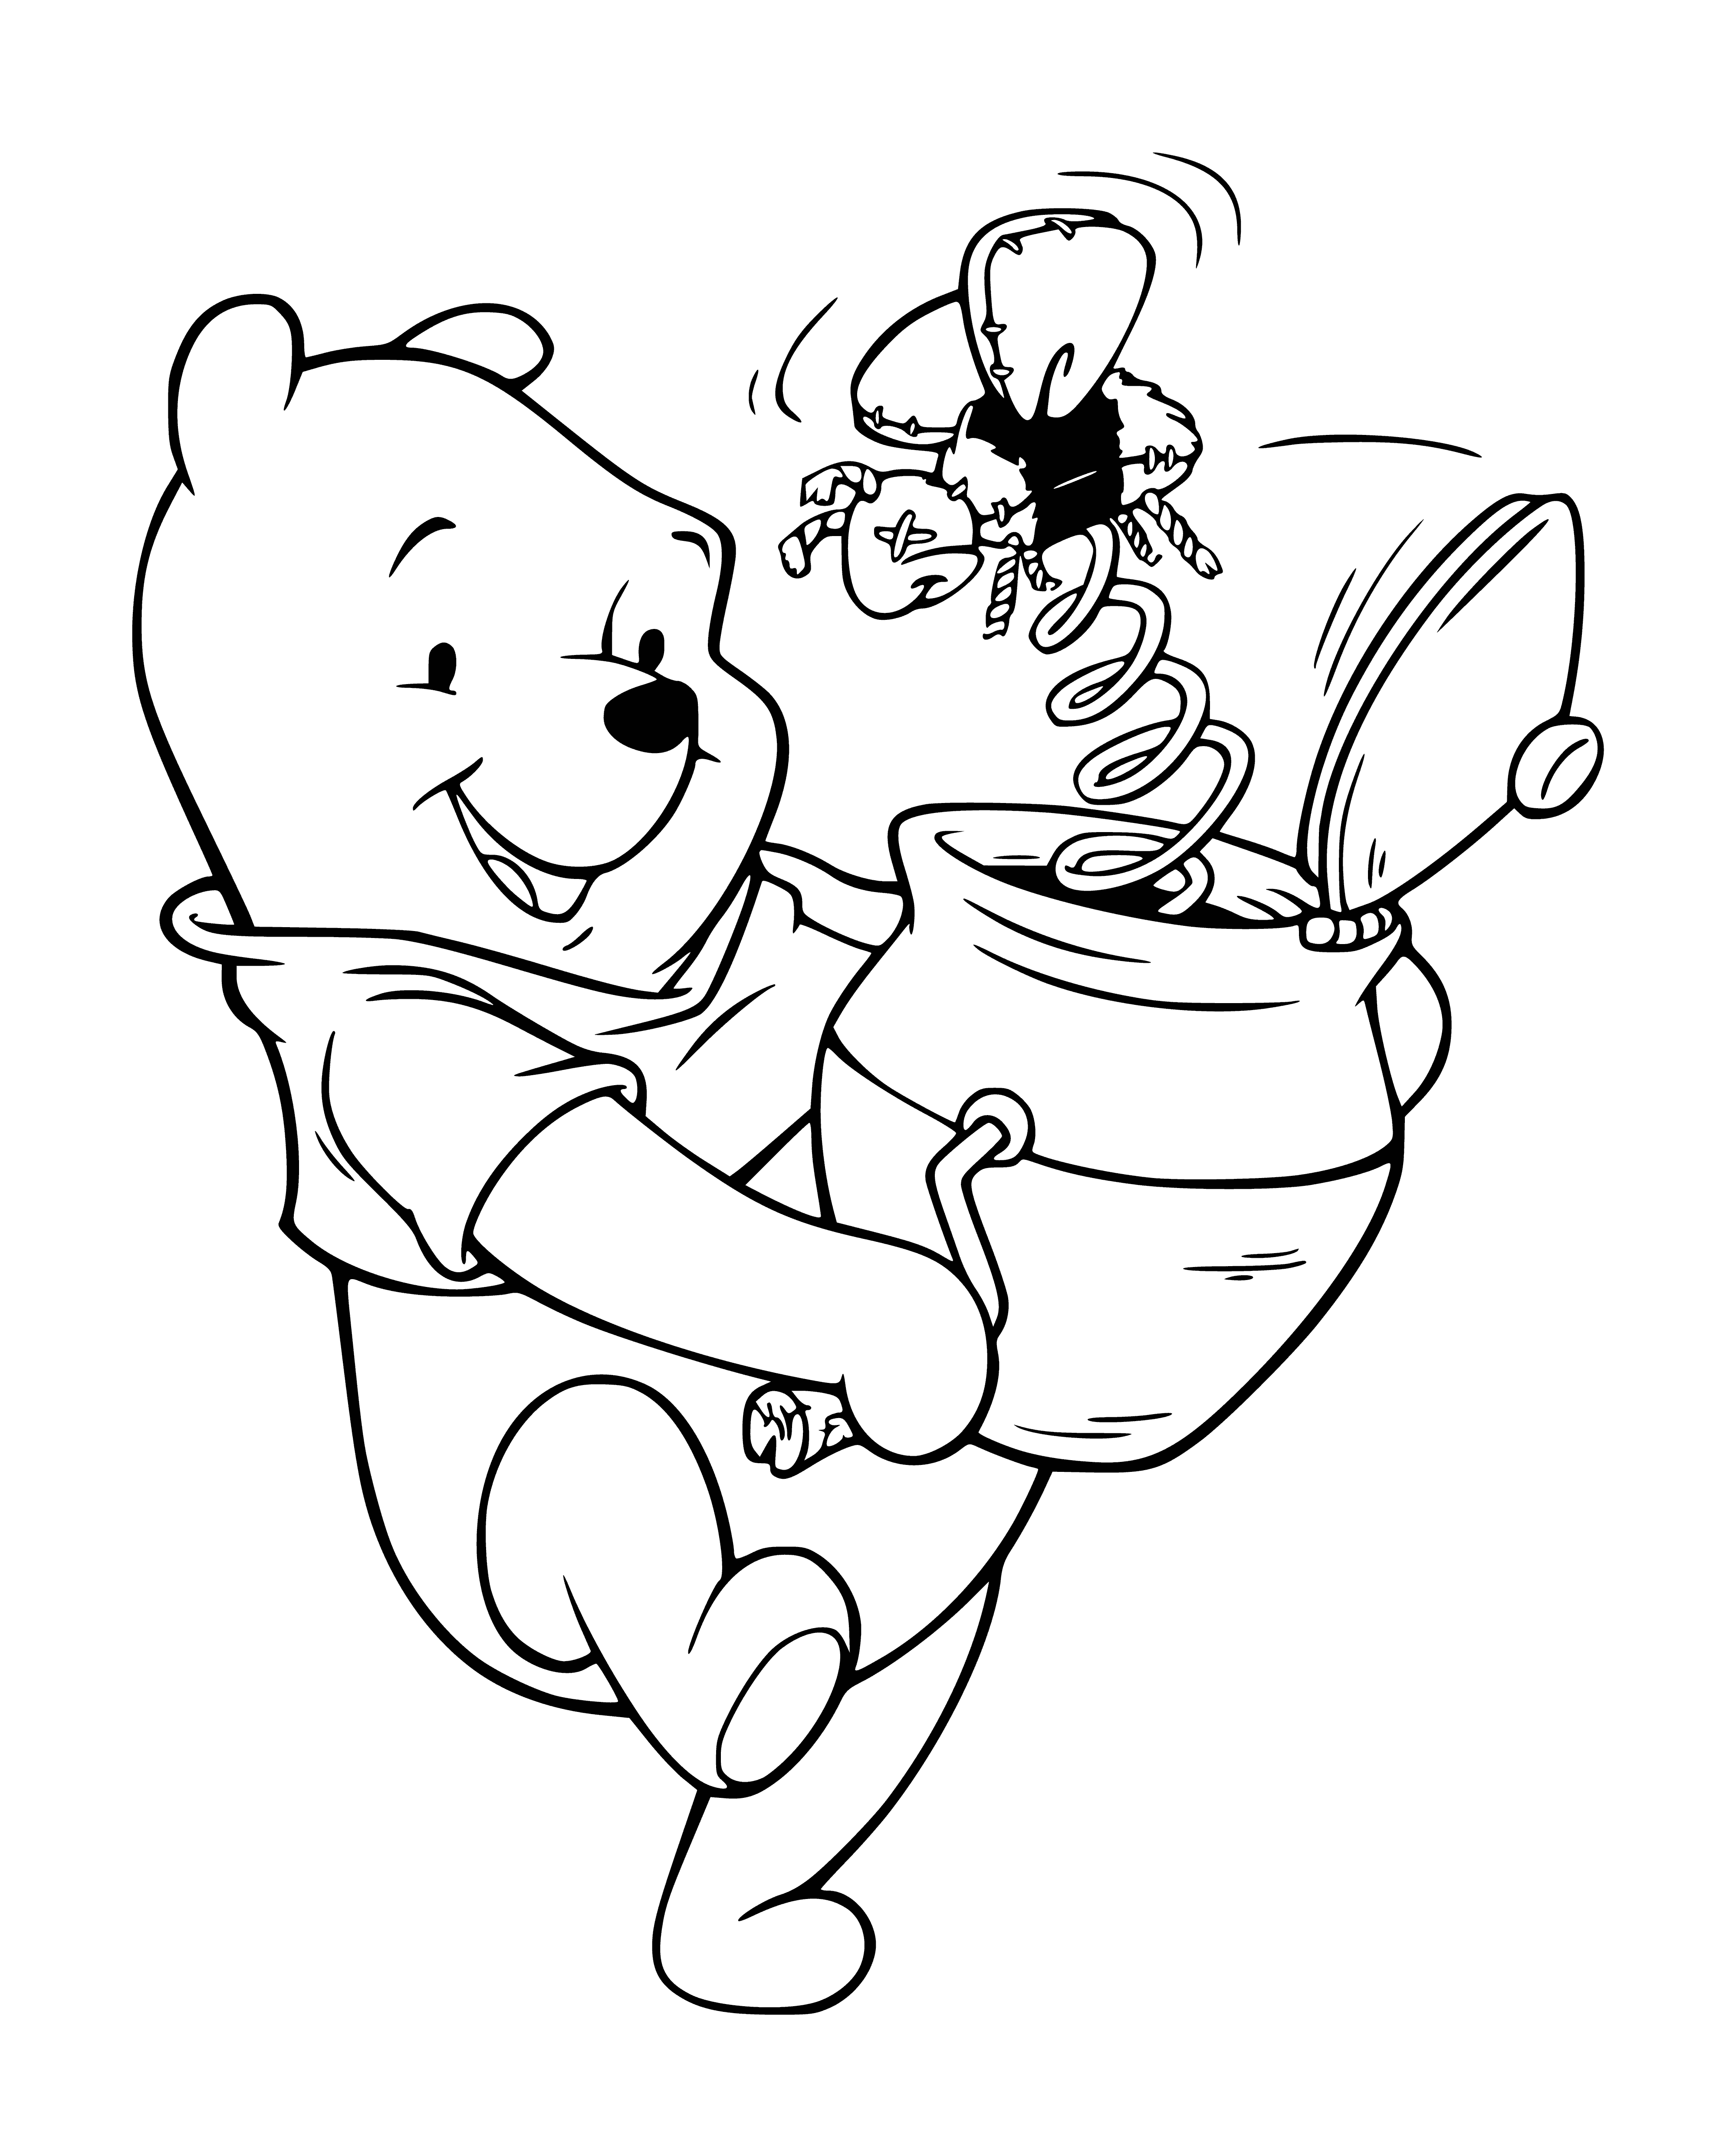 Surprise for coloring page